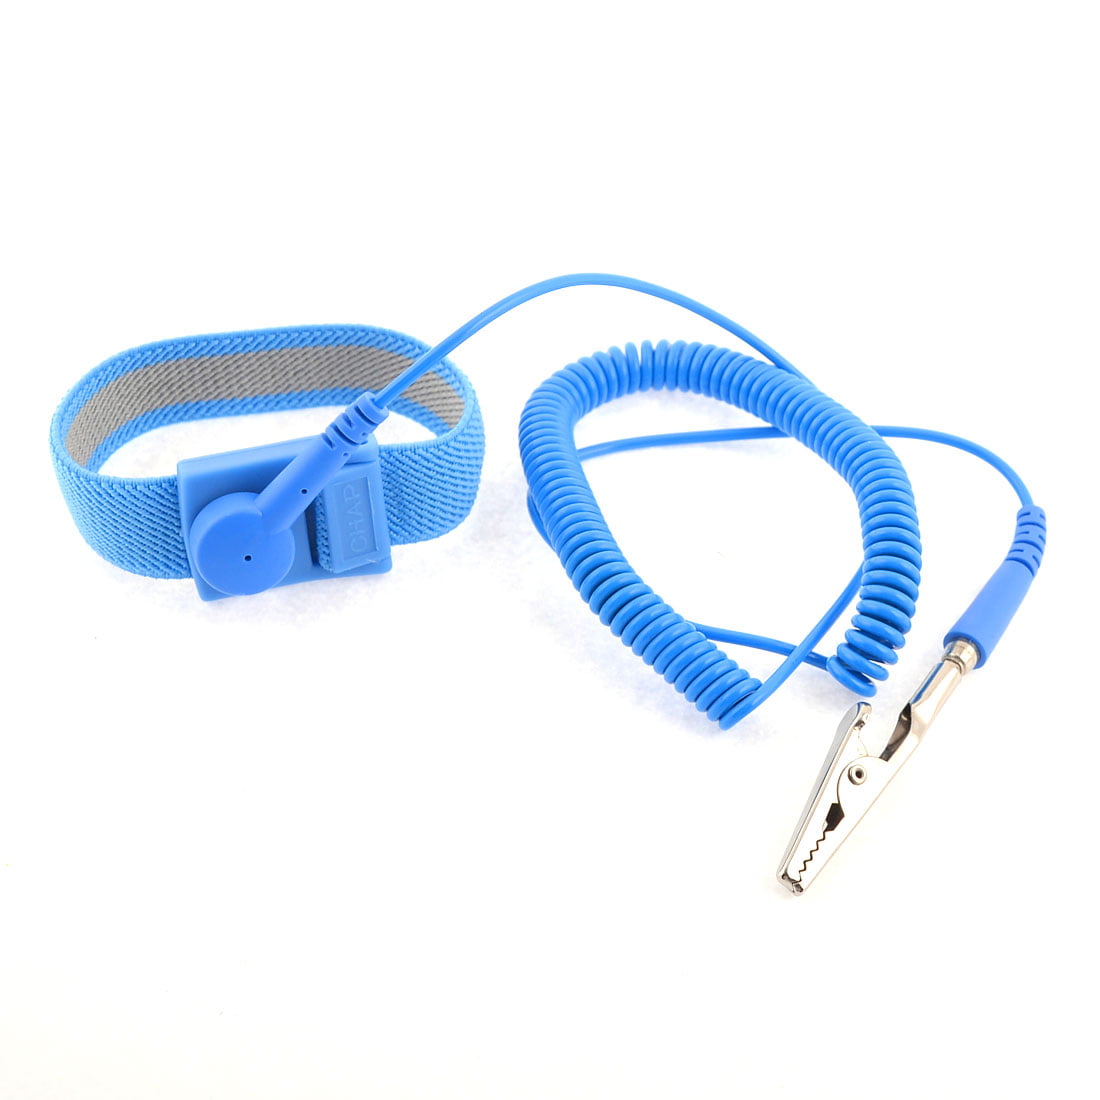 NEW BLUE Anti Static Antistatic ESD Adjustable Wrist Strap Band US SELLER 